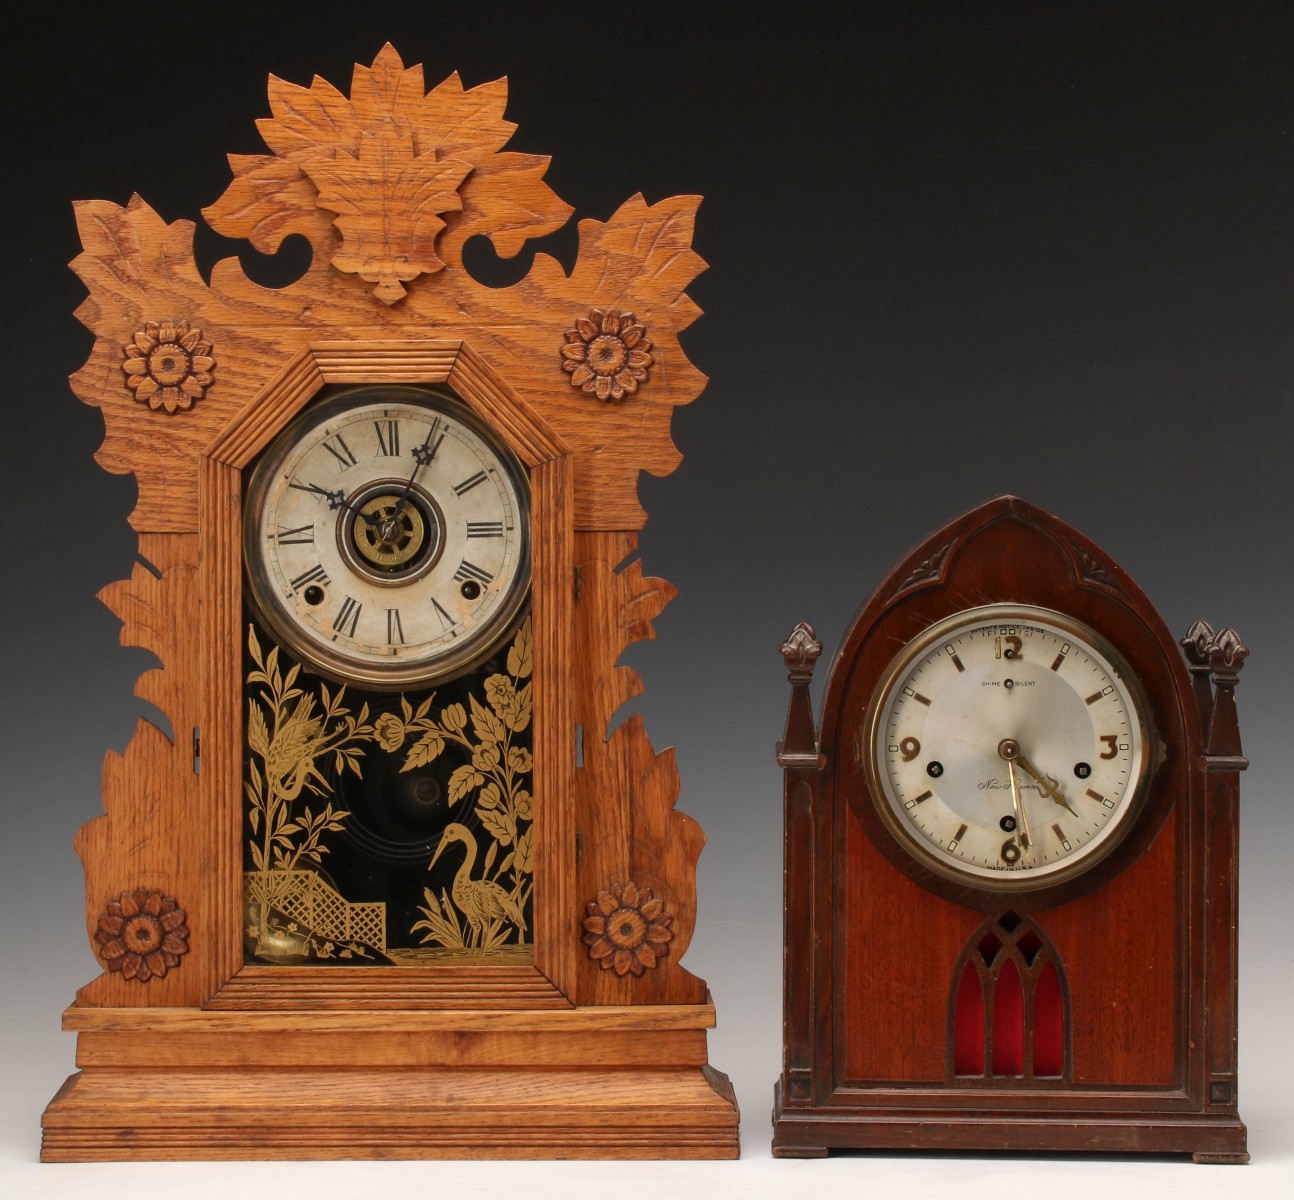 GILBERT 'SWAN' KITCHEN CLOCK AND NEW HAVEN GOTHIC